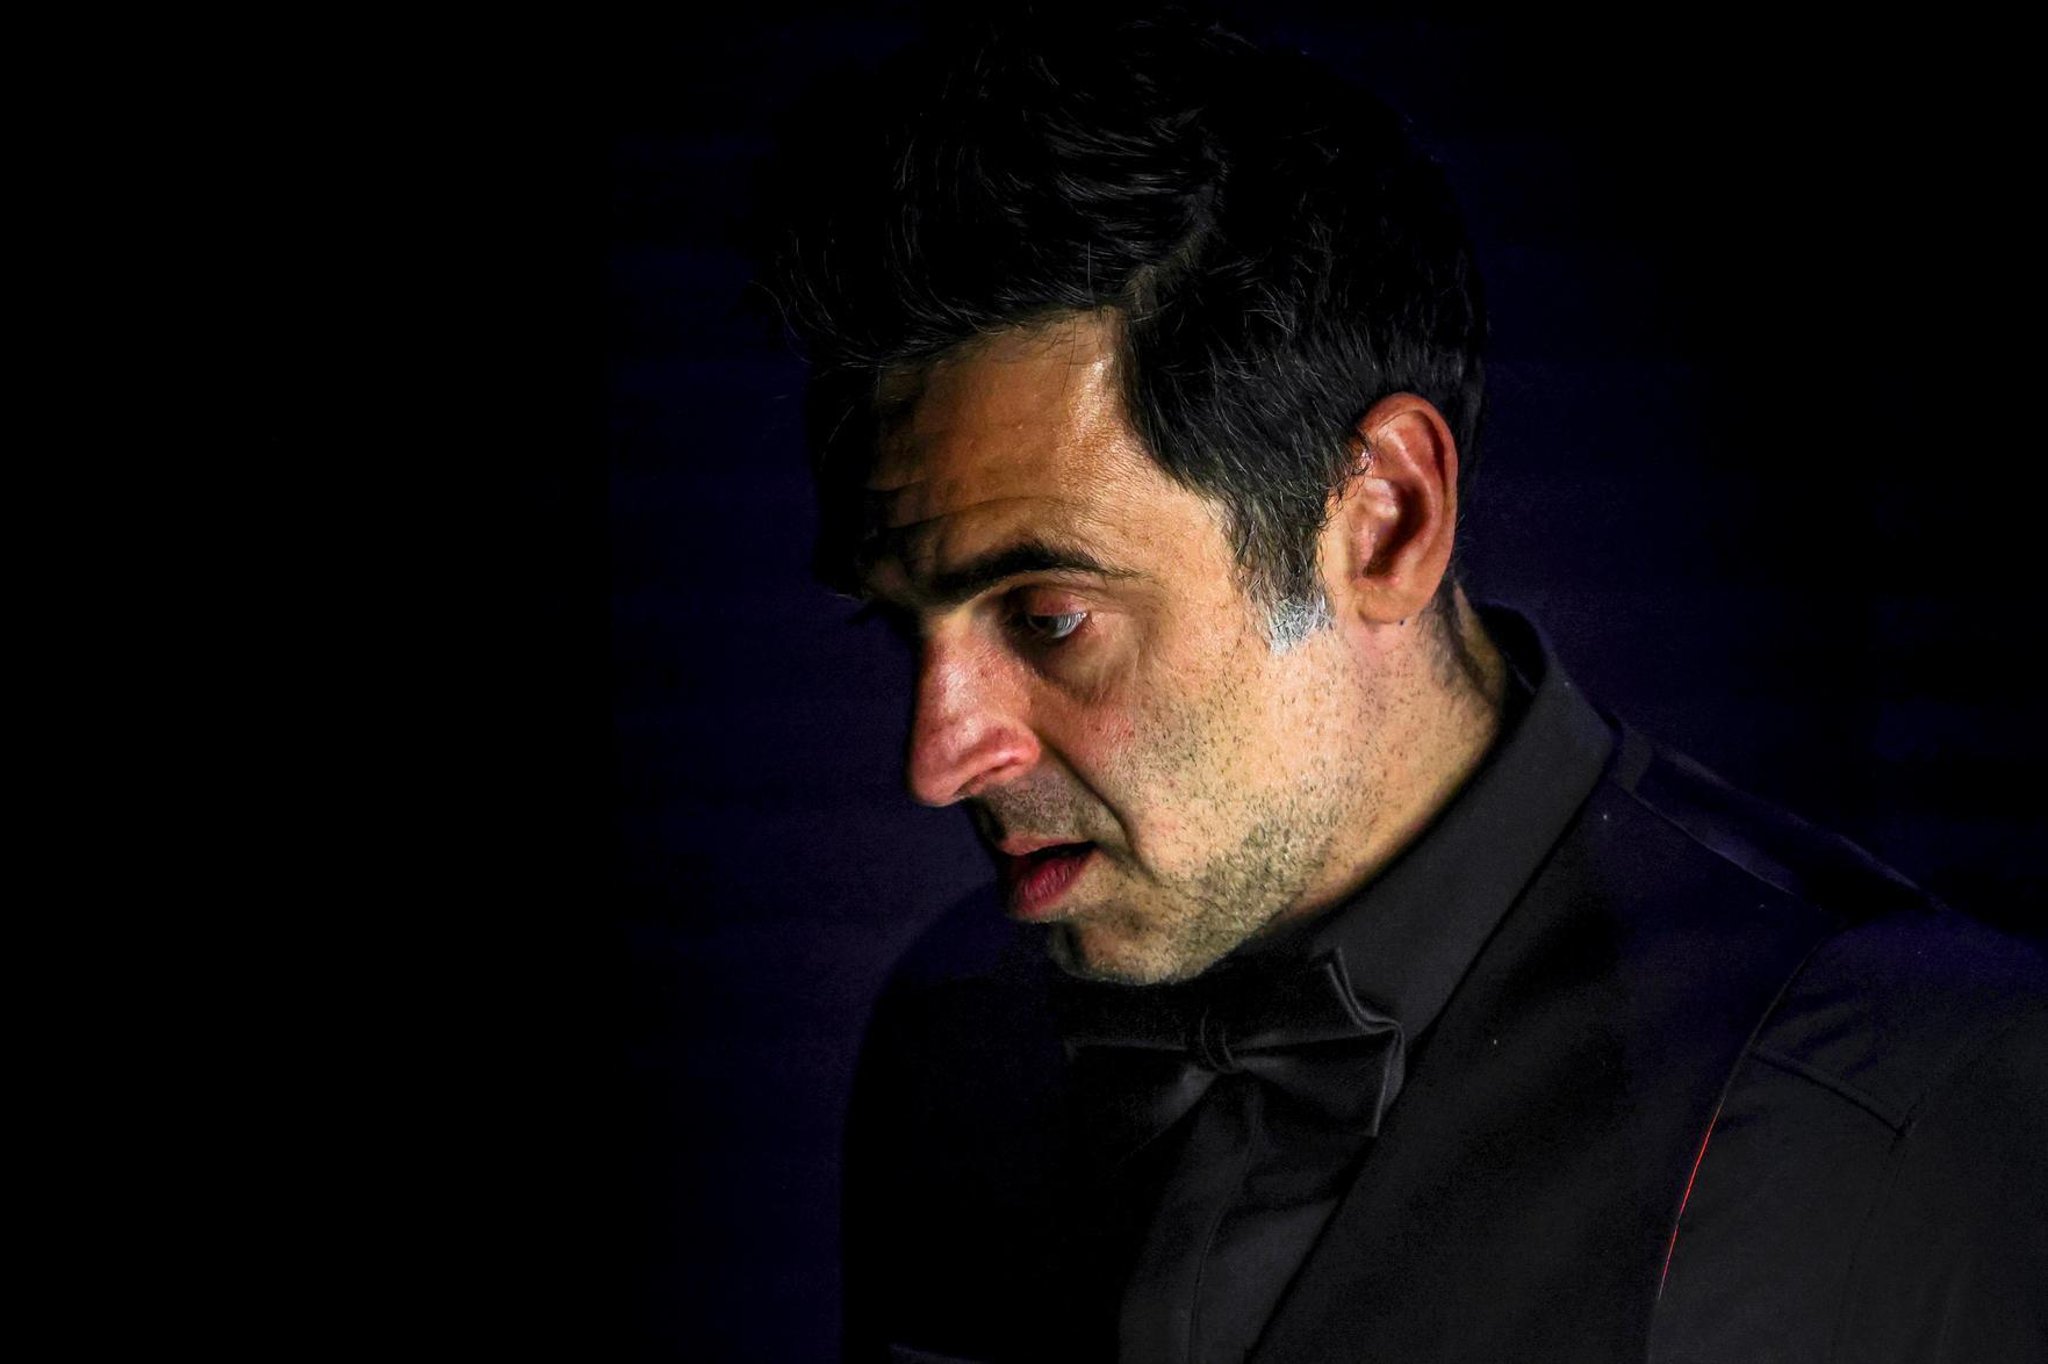 Snooker is a hobby and I'd skip Crucible for better offer – Ronnie O'Sullivan